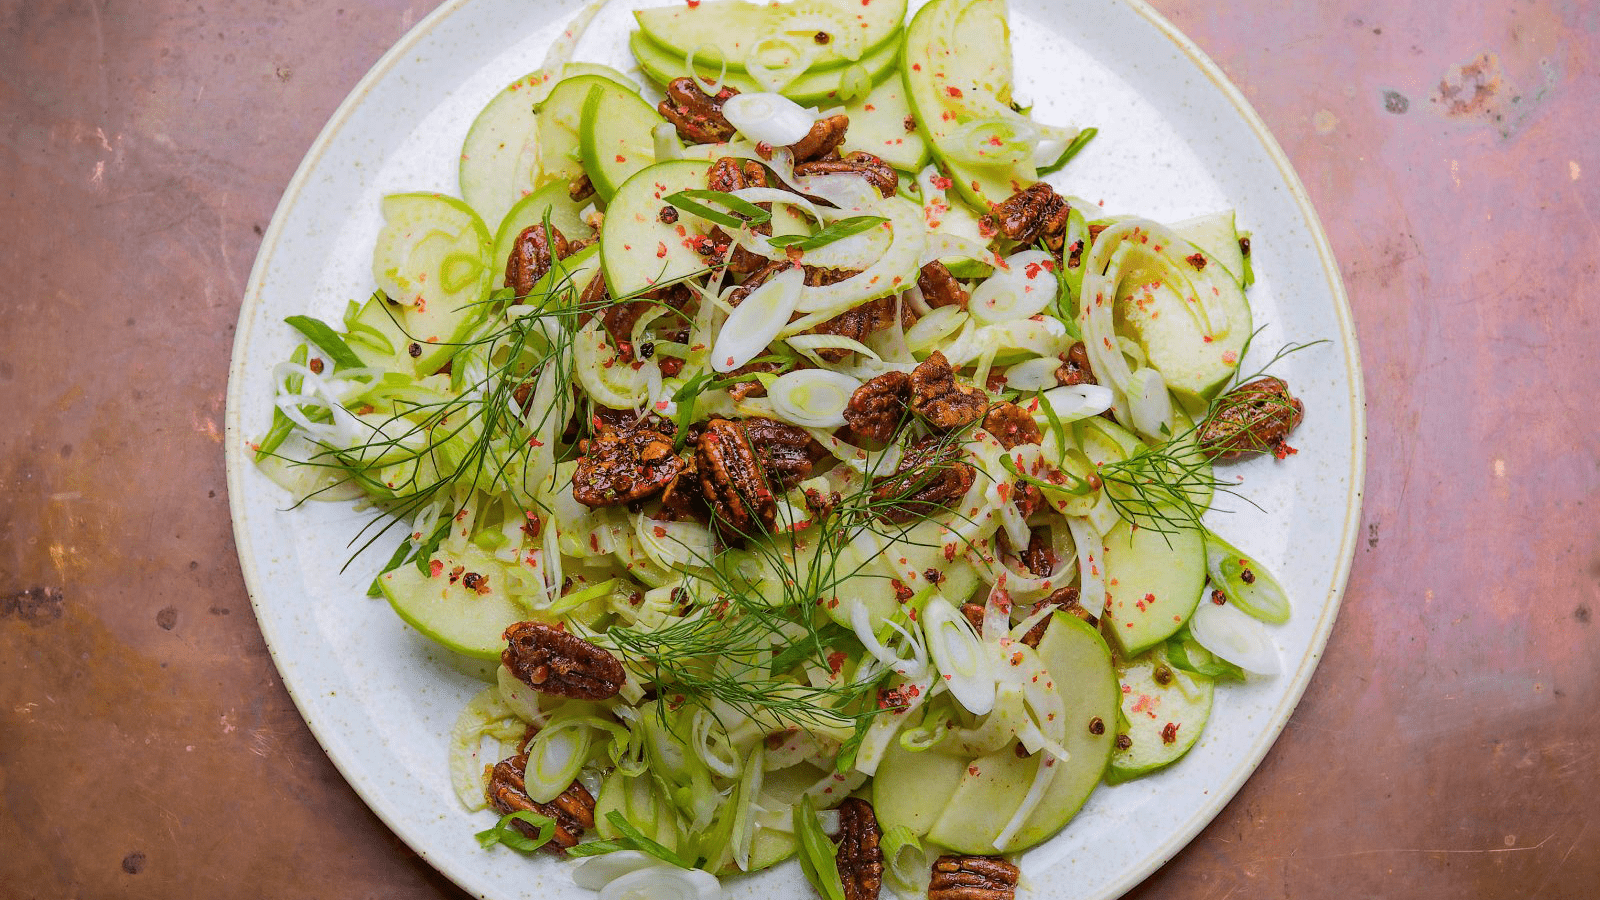 Apple-Fennel Salad with Candied Pecans by Christopher Kimball's Milk Street. © 2018 Christopher Kimball’s Milk Street. All Rights Reserved.